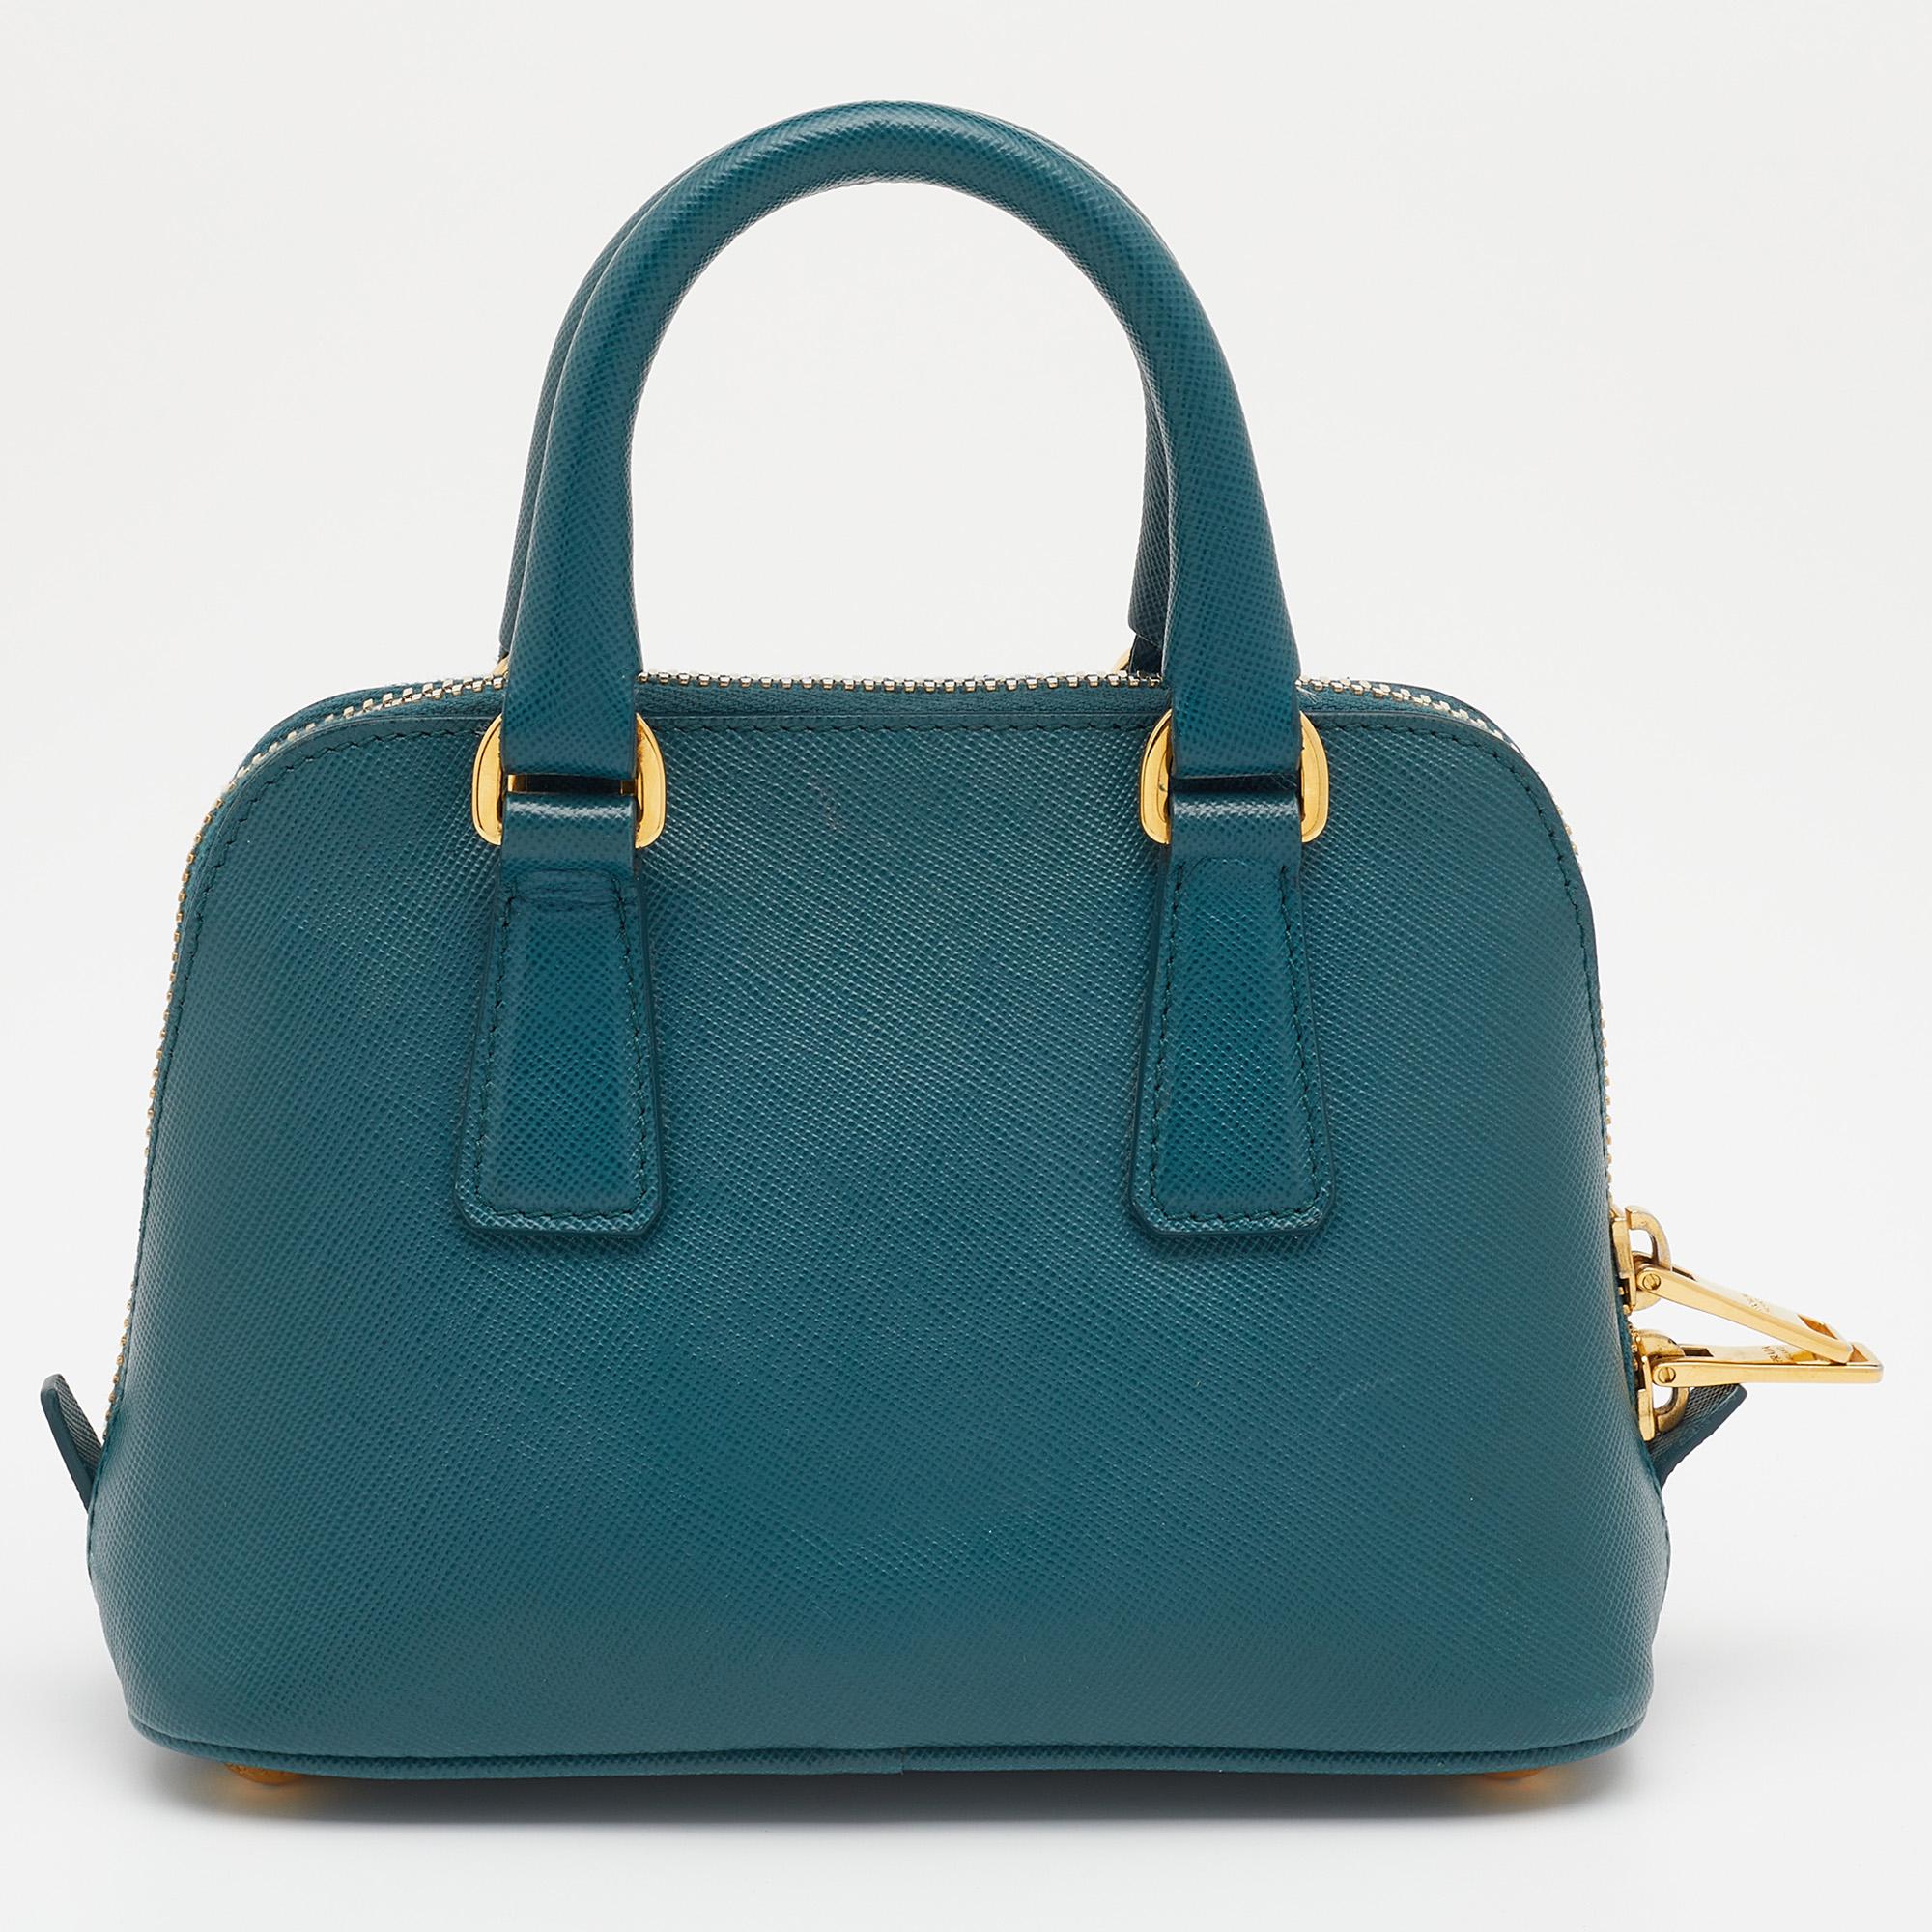 Prada's Promenade is a much-loved accessory. Lovely in green, the Saffiano leather bag features two handles, an optional strap, metal feet, and the brand logo on the front. For those who love minimally luxe pieces, this Prada bag is